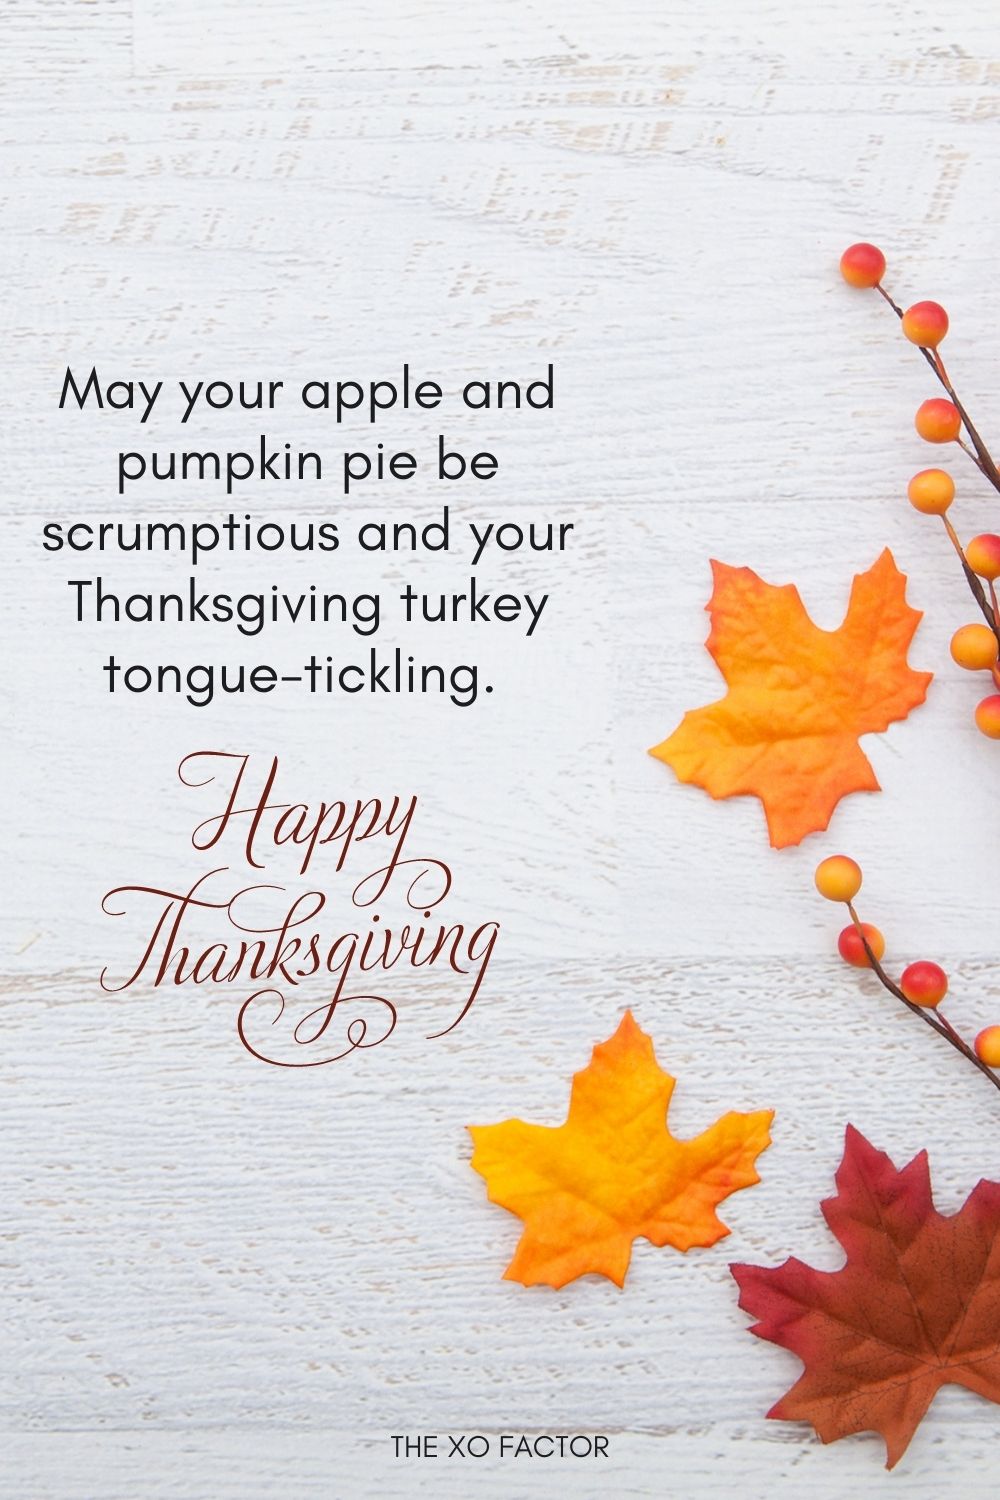 May your apple and pumpkin pie be scrumptious and your Thanksgiving turkey tongue-tickling. Happy Thanksgiving!